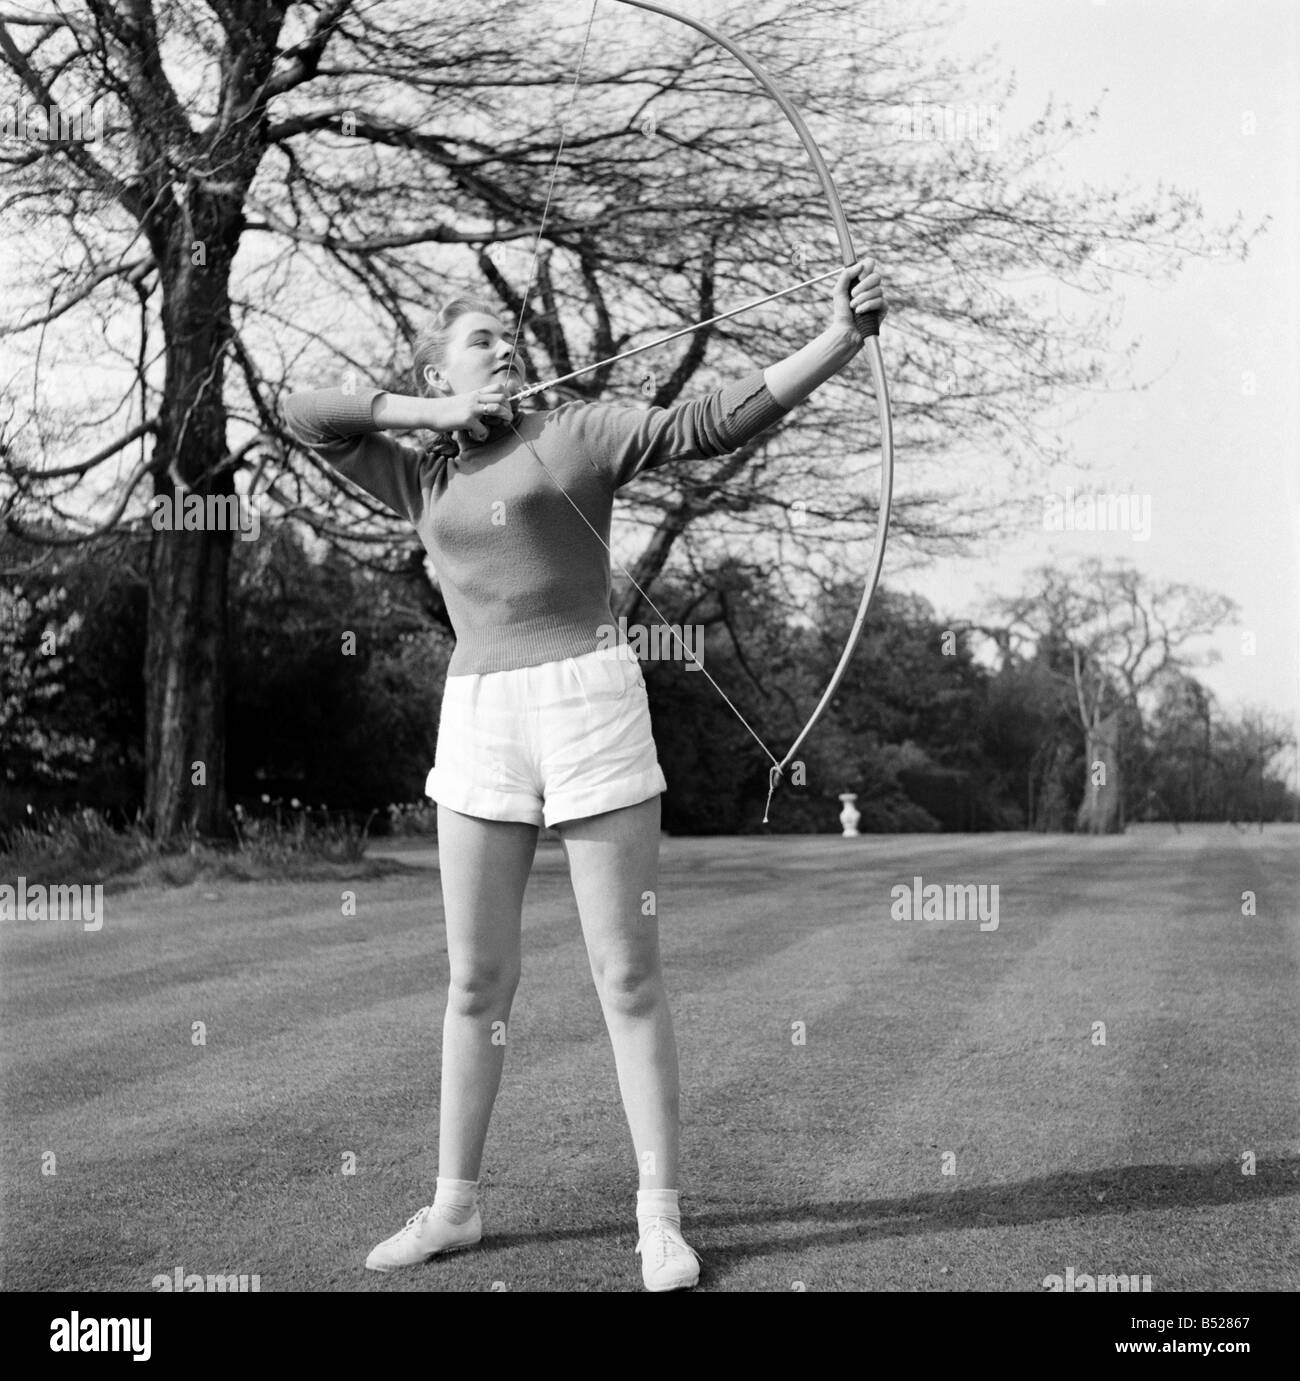 Taking part in the documentary film 'Archery' which is being made by Faro Films, London, is pretty Miss Sylvia Chapman, 18, from Kingsbury. Seen filming in Richmond park. April 1953 D2093 Stock Photo